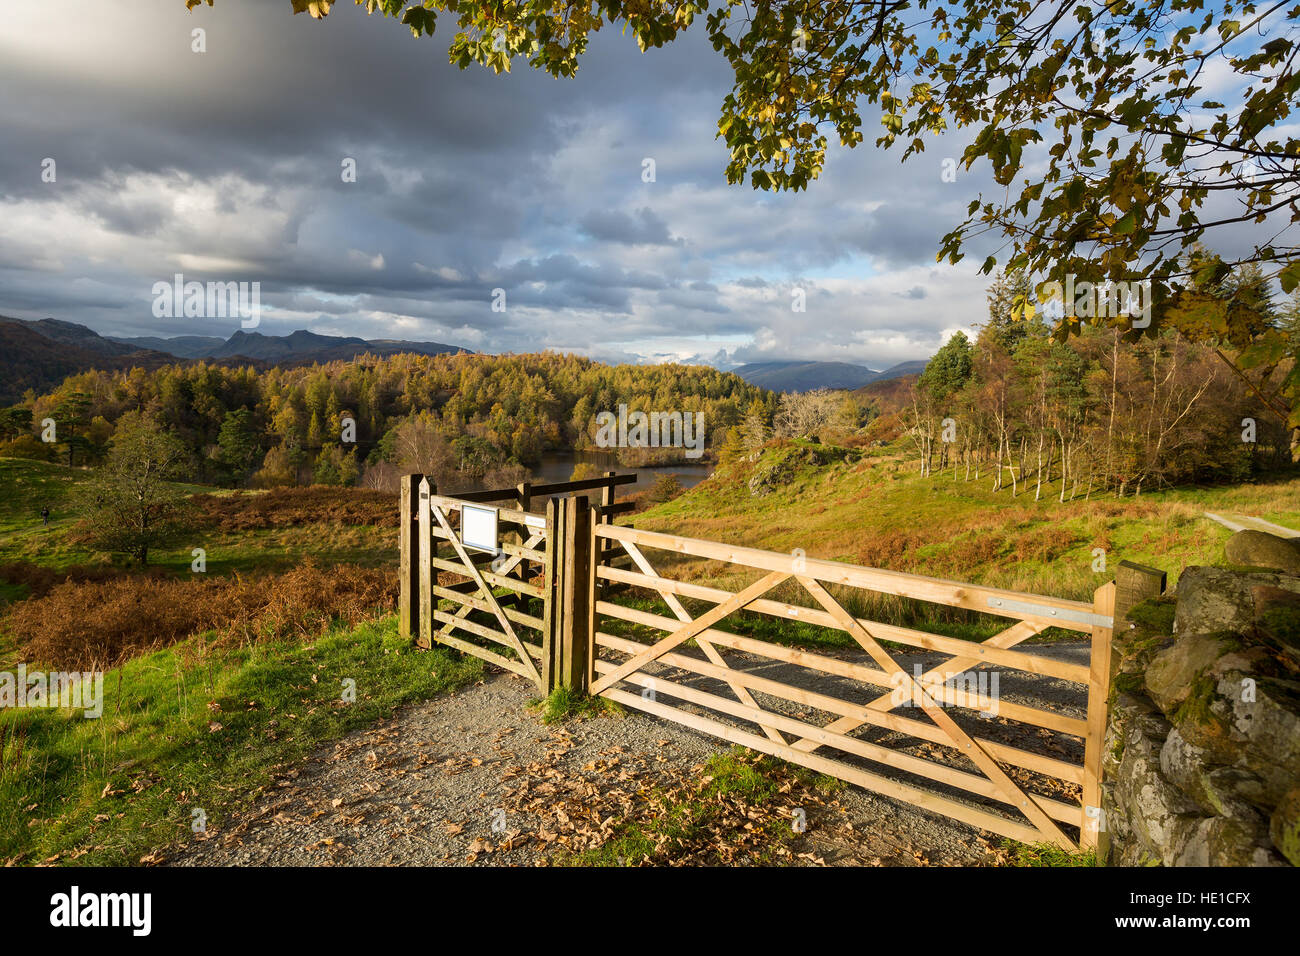 Wooden gateway in a beautiful rural setting at Tarn Hows, the Lake District, England. Stock Photo